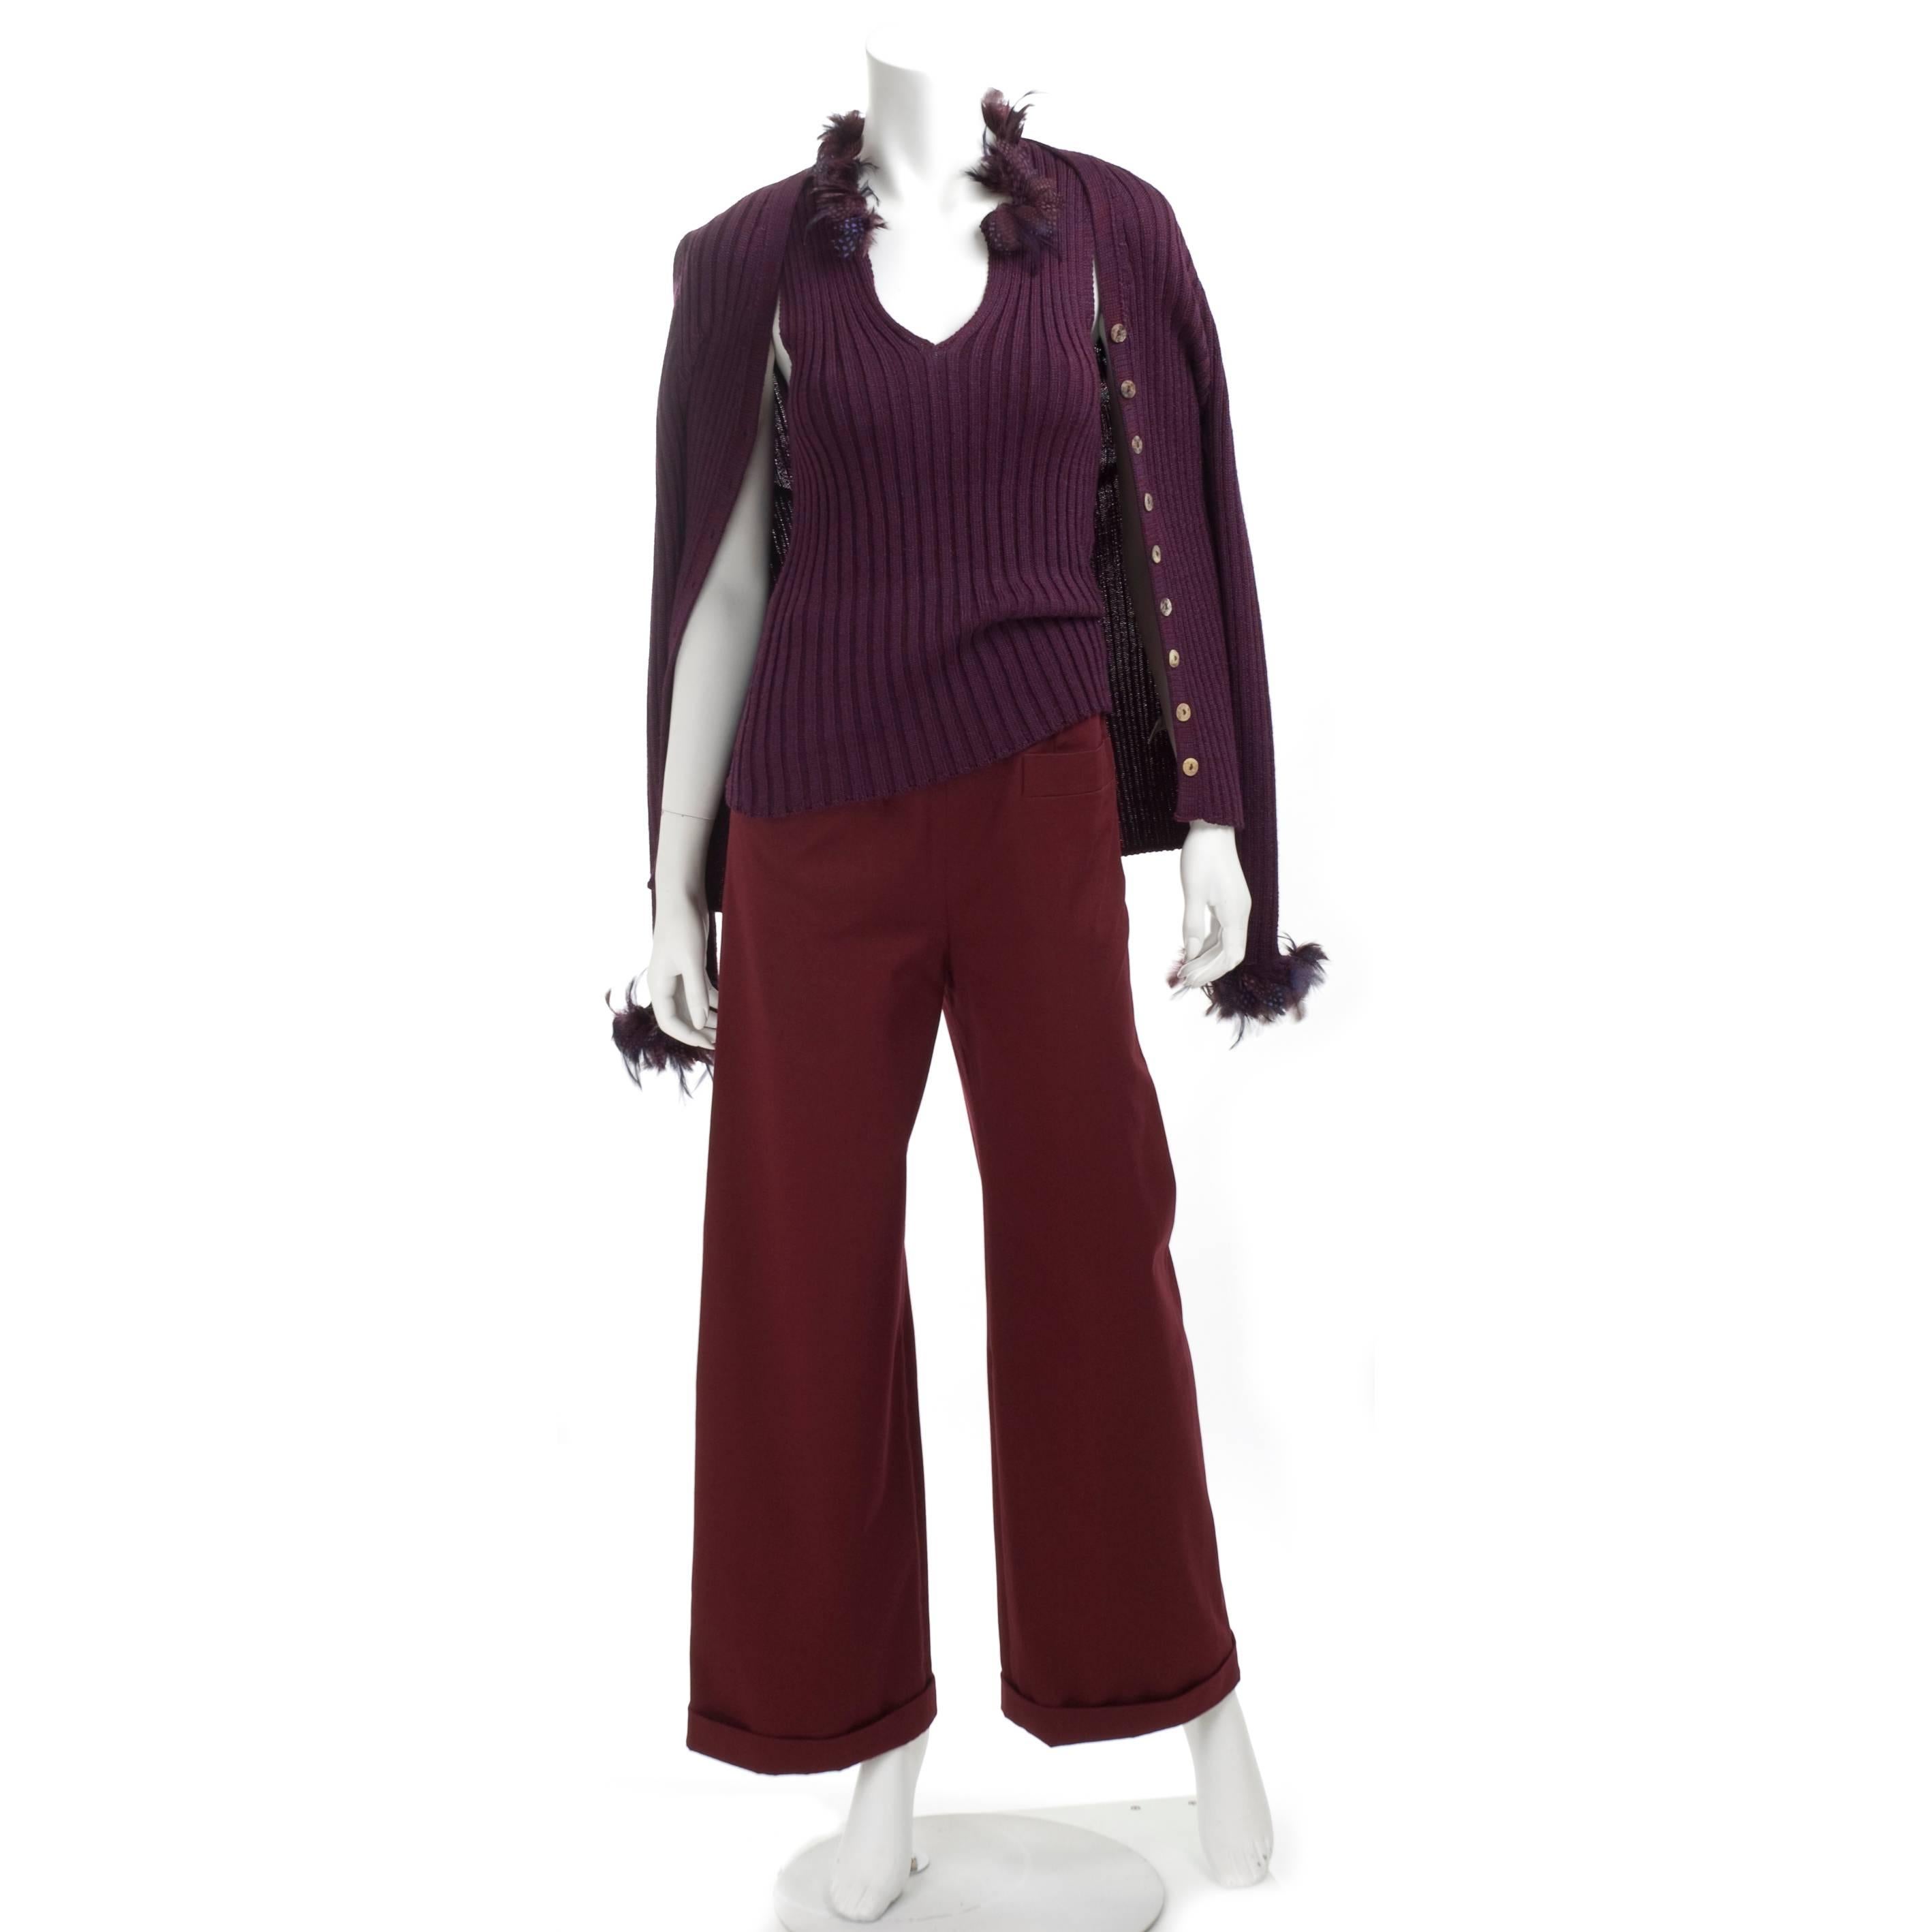 Vintage 90s Yves Saint Laurent Ensemble - Twinset with Guinea Fowl Feathers.
The twinset in 2 tone aubergine and brick red, same as the wide leg pants.
Material: 50% Wool - 45% Viscose and 5% other fibers, pants are cotton twill.
Beautiful feathers